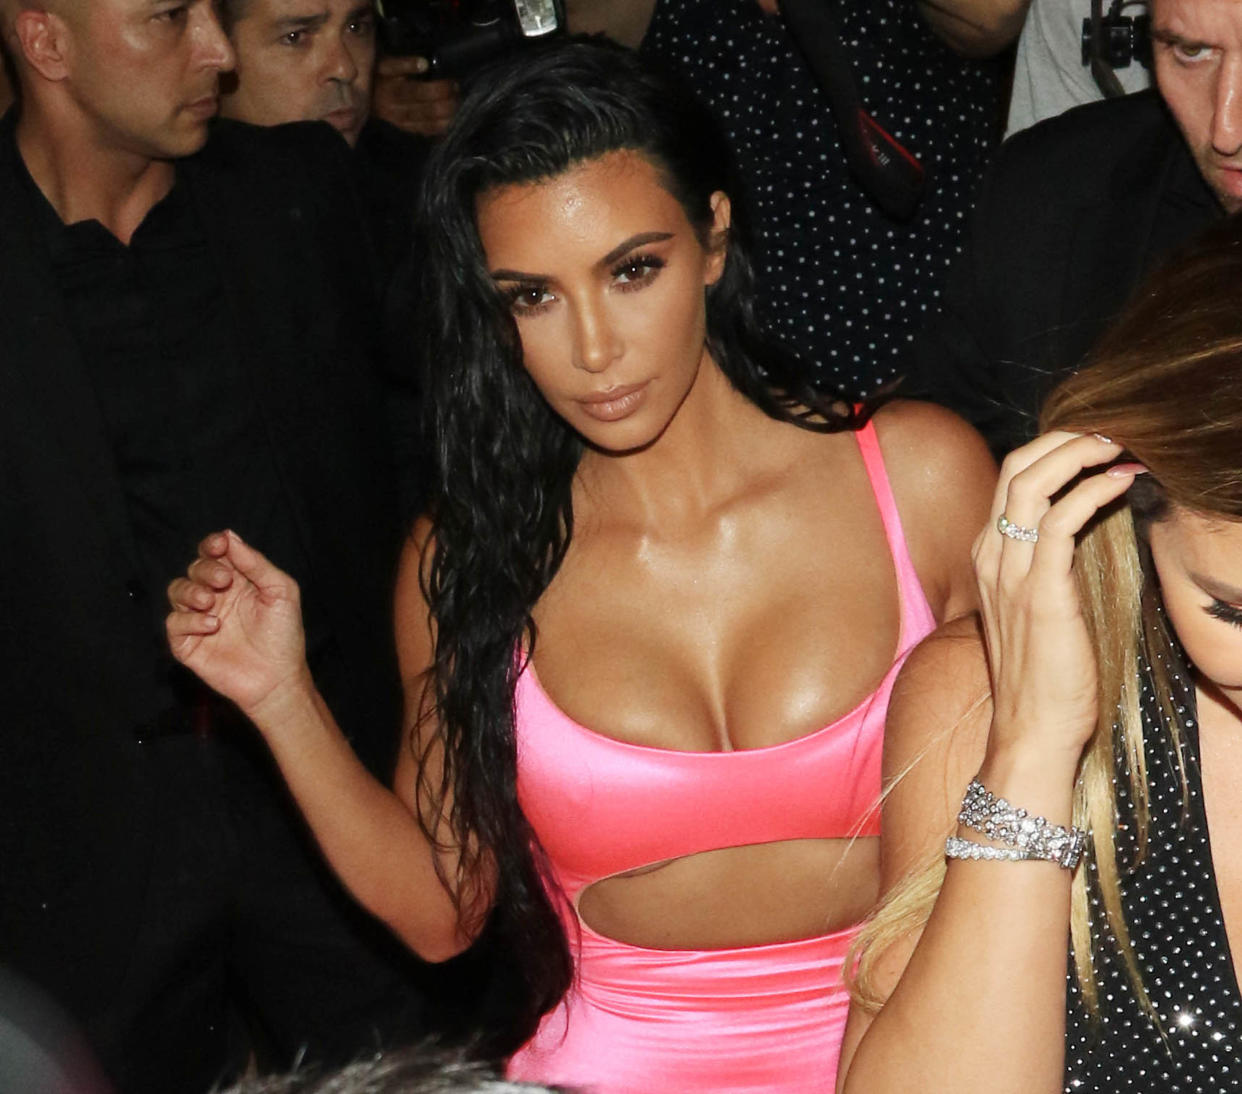 Kim Kardashian out in Hollywood on Aug. 9. (Photo: Hollywood to You/Star Max/GC Images)